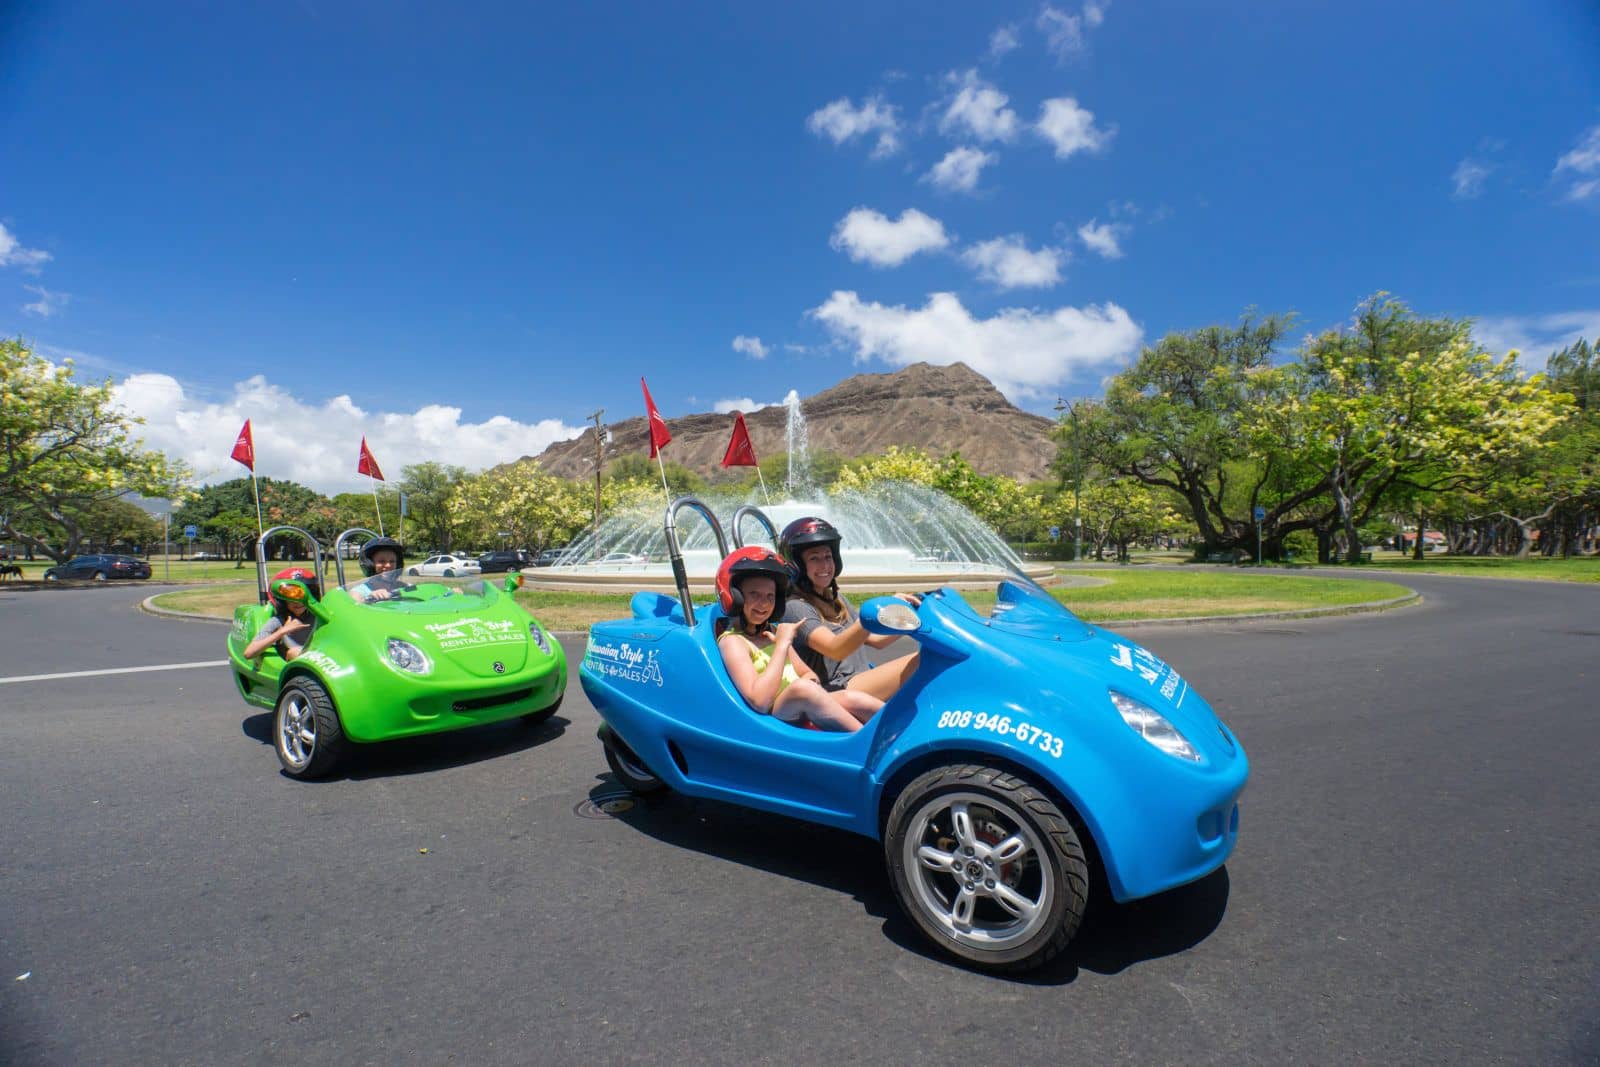 Two Person Moped Rentals in Waikiki Hawaii Scoot Coupe | Car rental